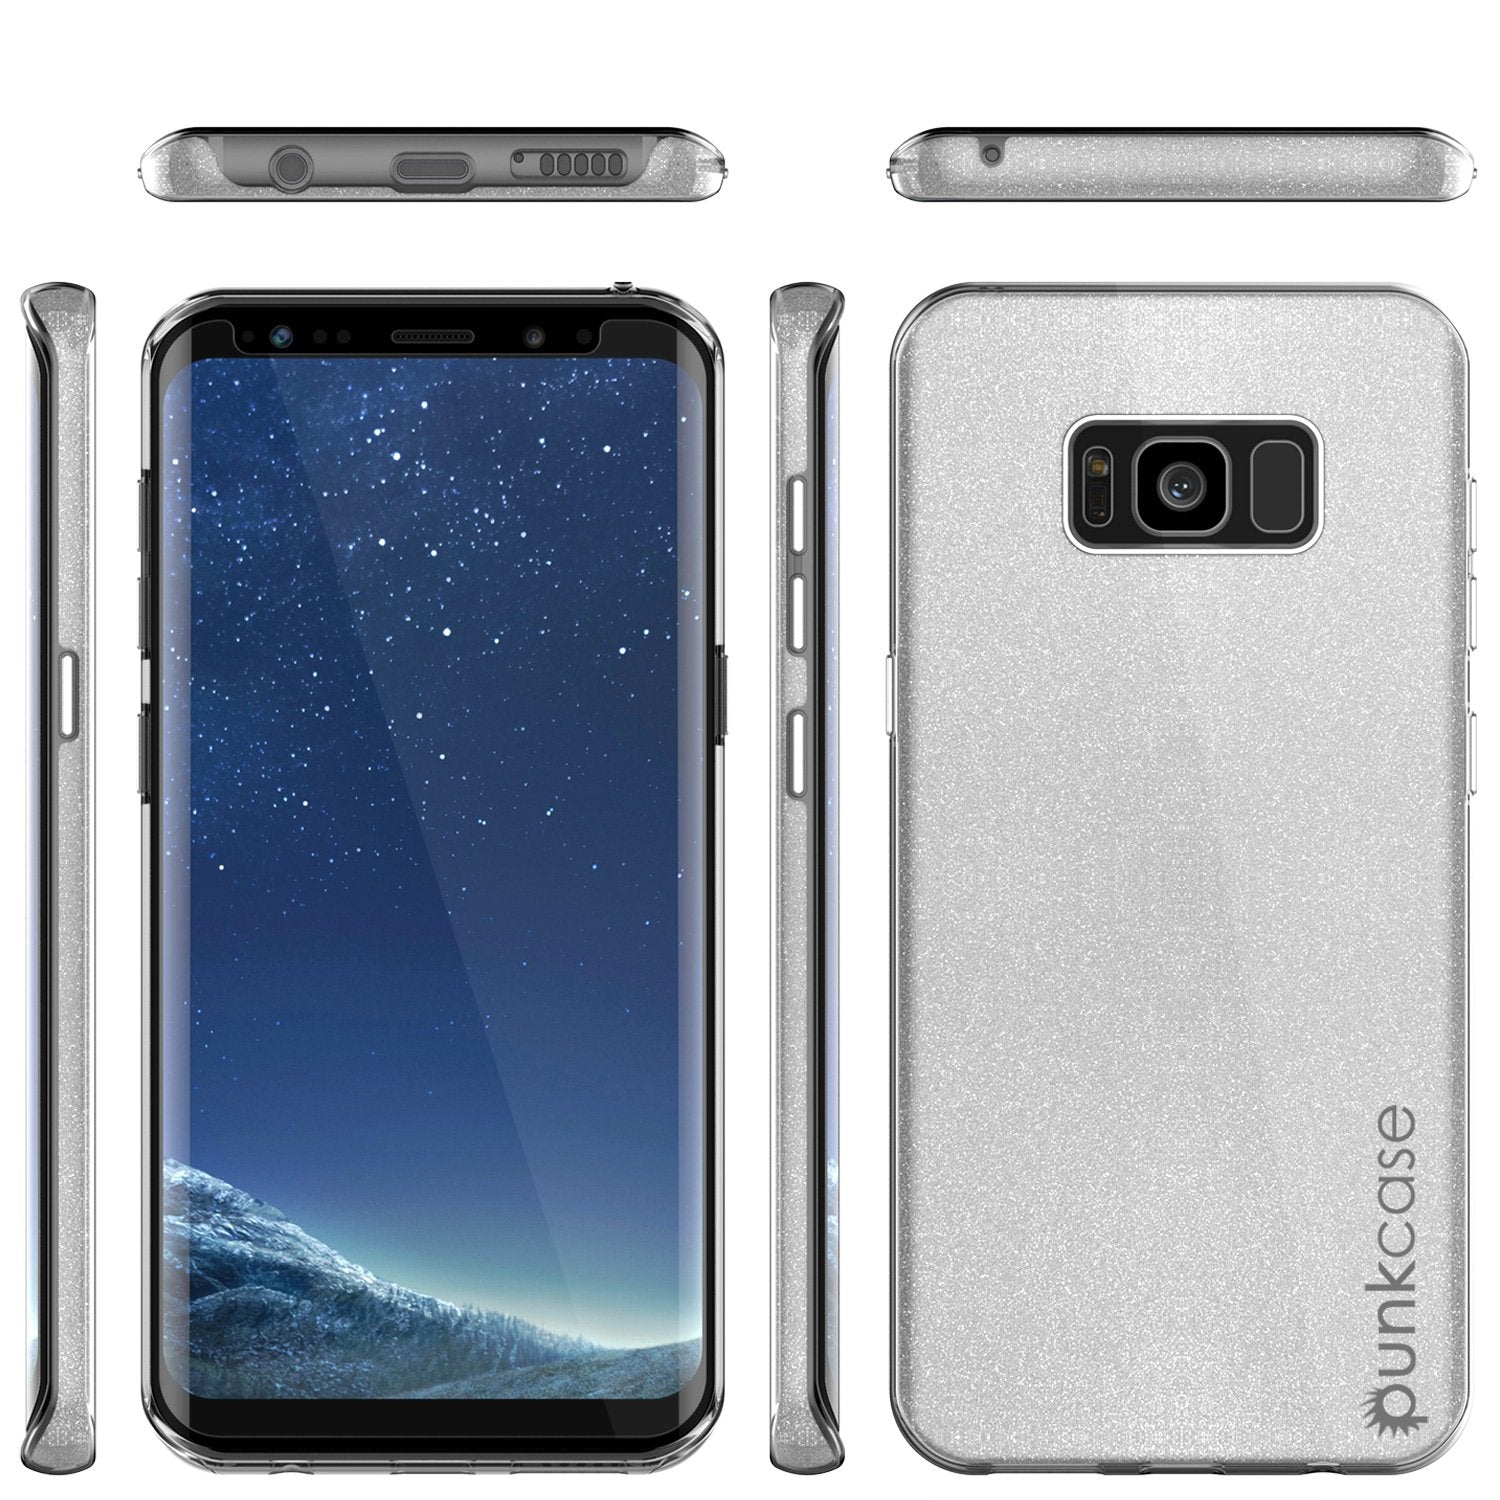 Galaxy S8 Case, Punkcase Galactic 2.0 Series Ultra Slim Protective Armor TPU Cover w/ PunkShield Screen Protector | Lifetime Exchange Warranty | Designed for Samsung Galaxy S8 [Silver] - PunkCase NZ